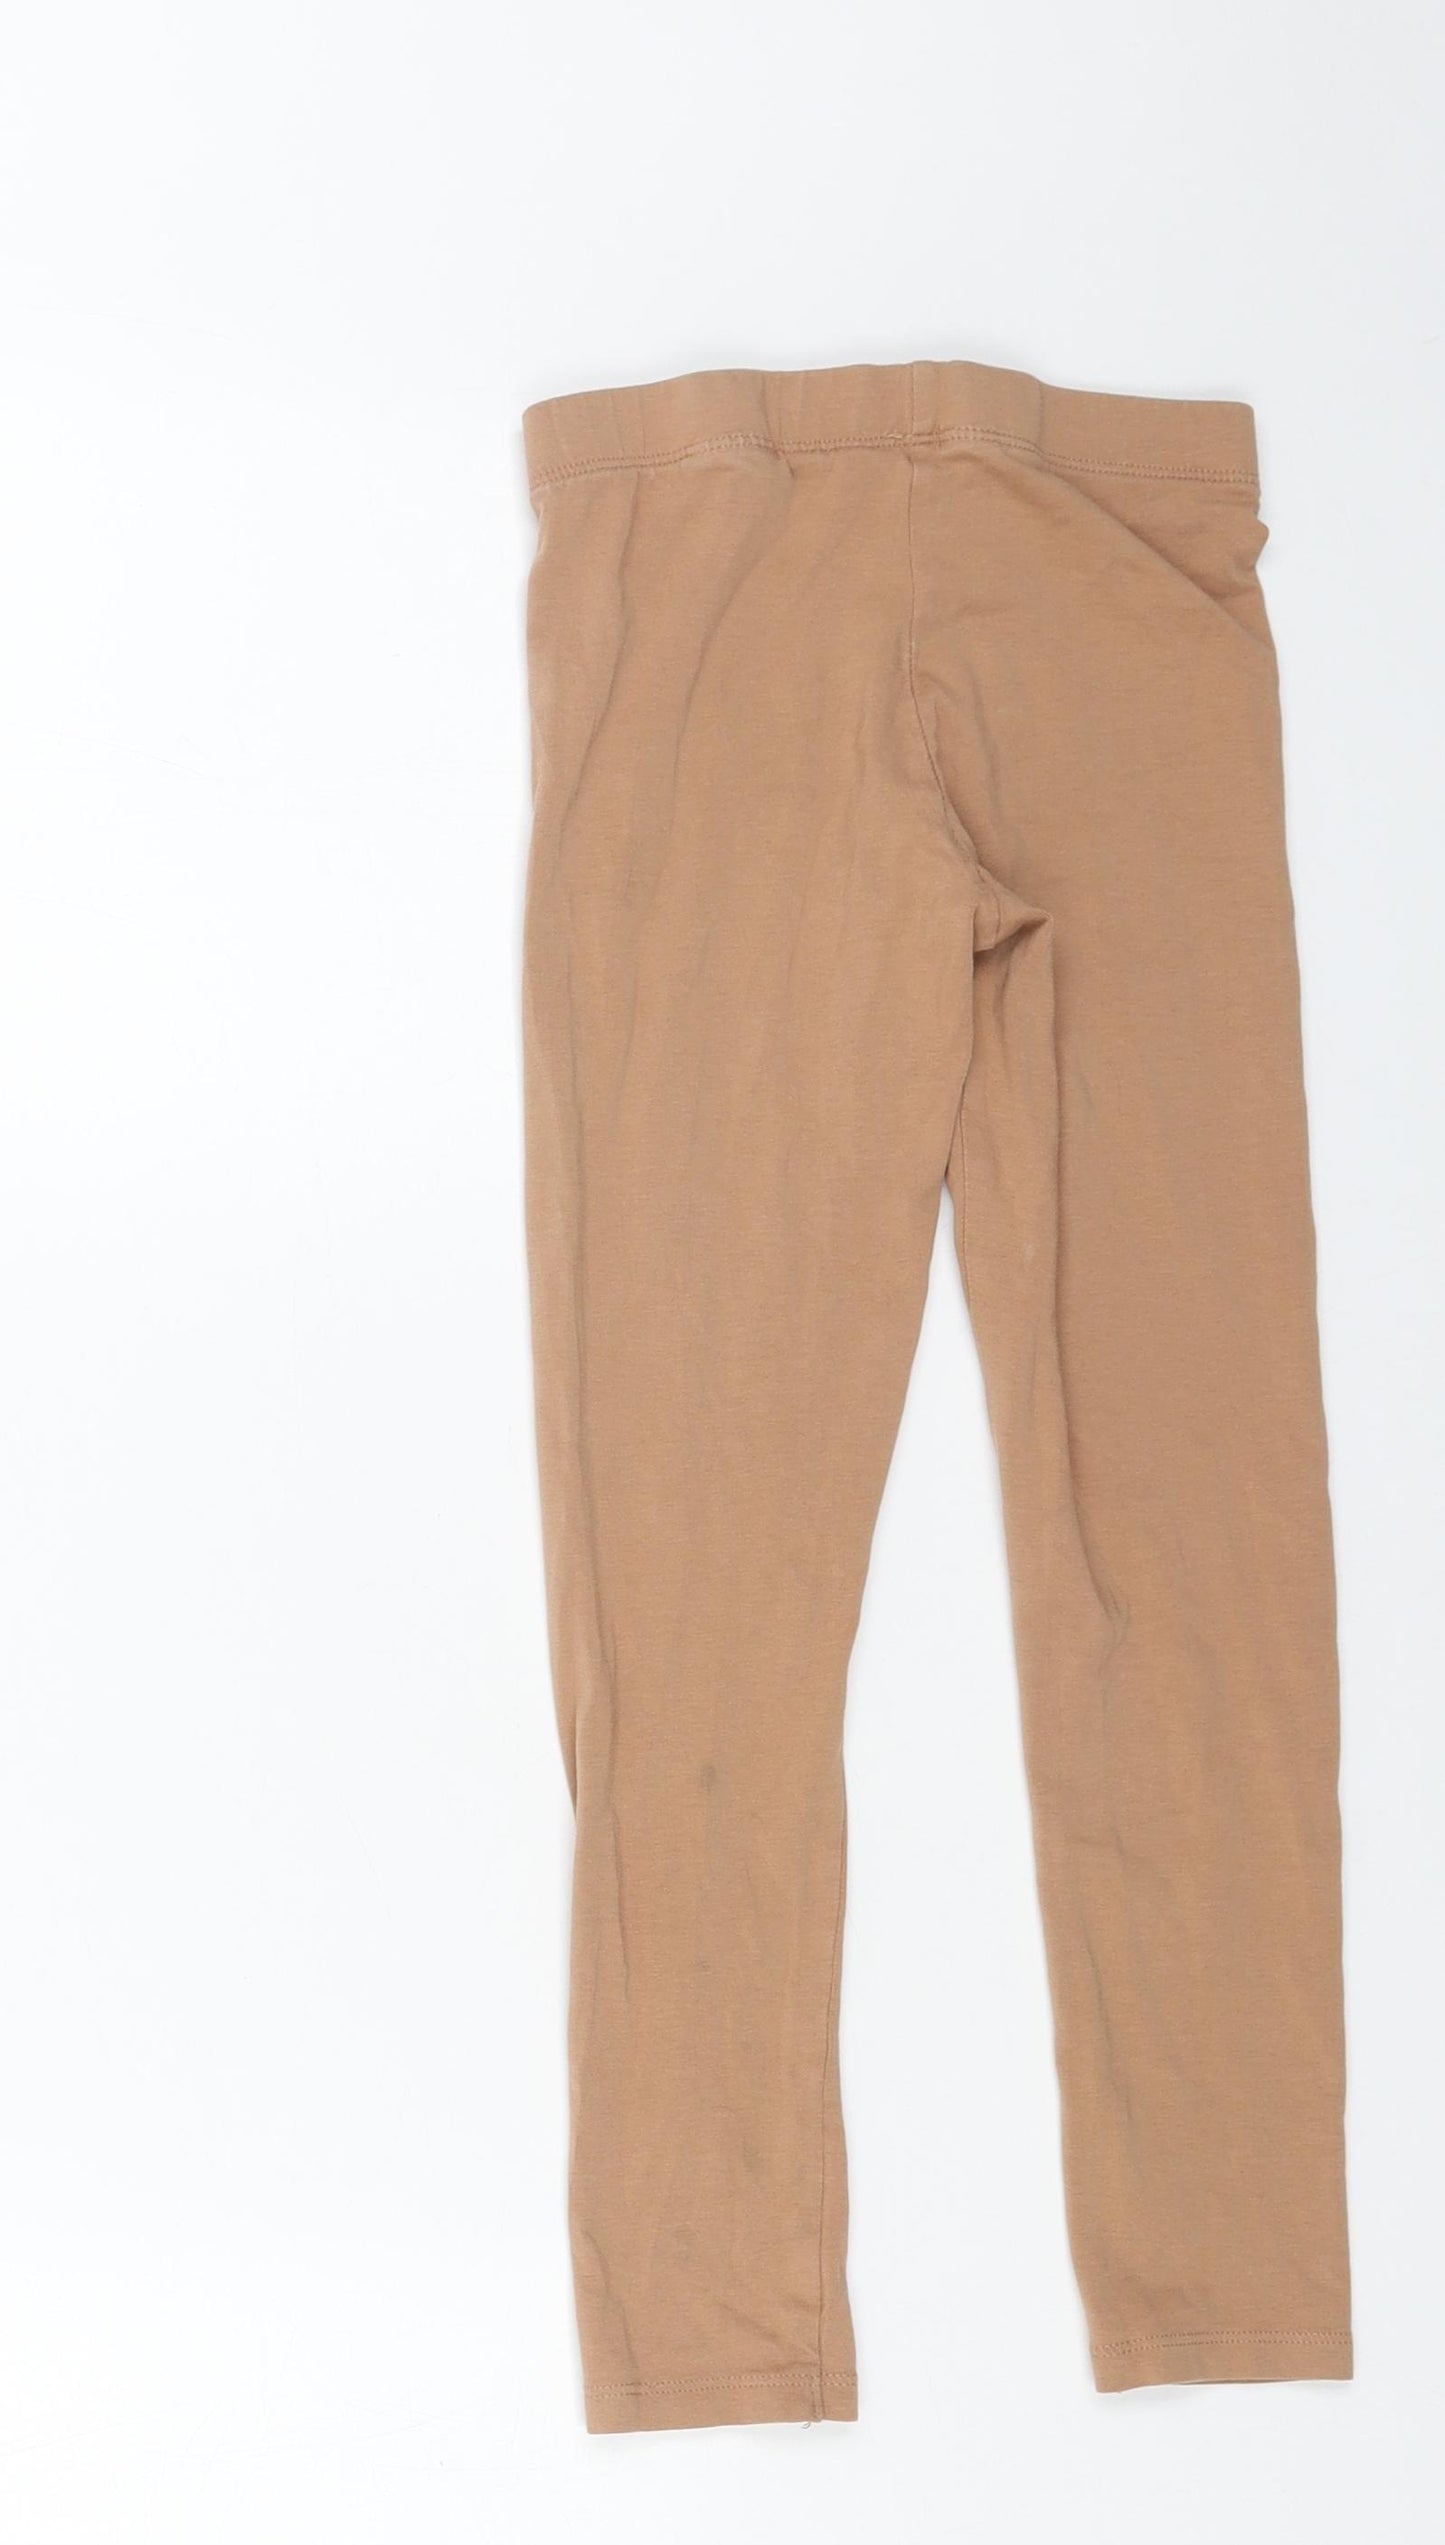 H&M Girls Beige Cotton Jogger Trousers Size 7-8 Years Regular Pullover